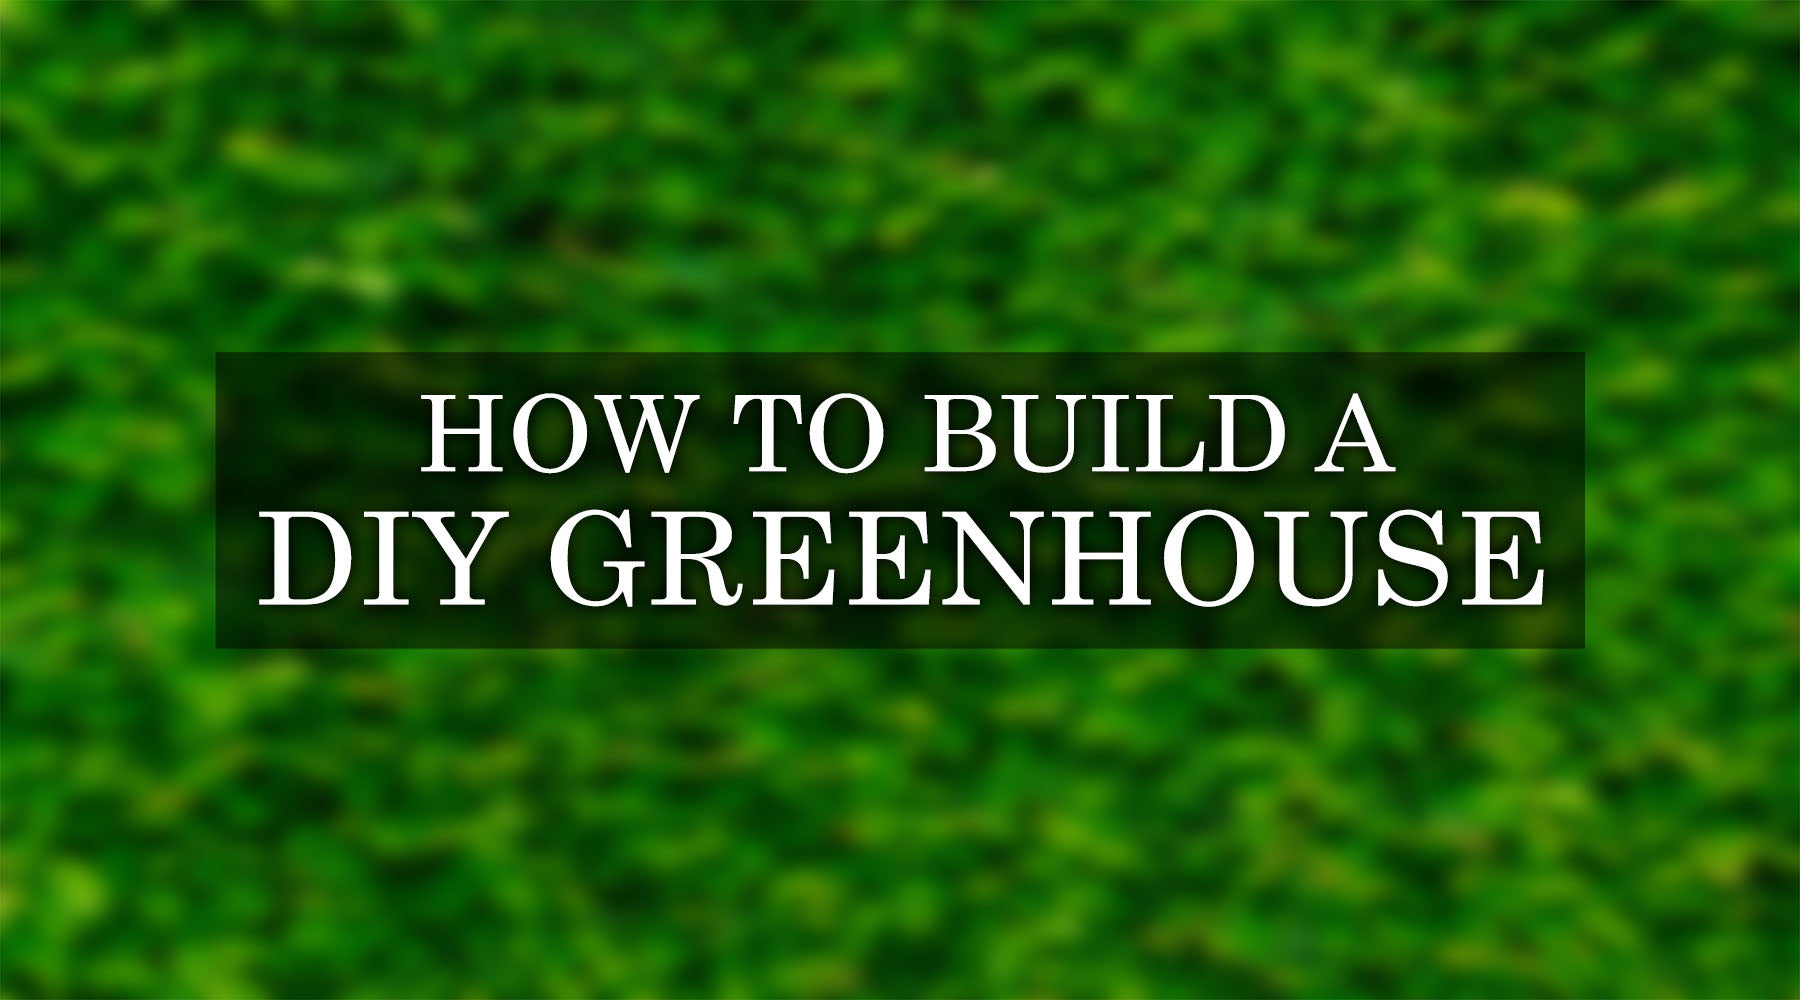 How to Build a Greenhouse: A Step-by-Step to Build DIY Greenhouse